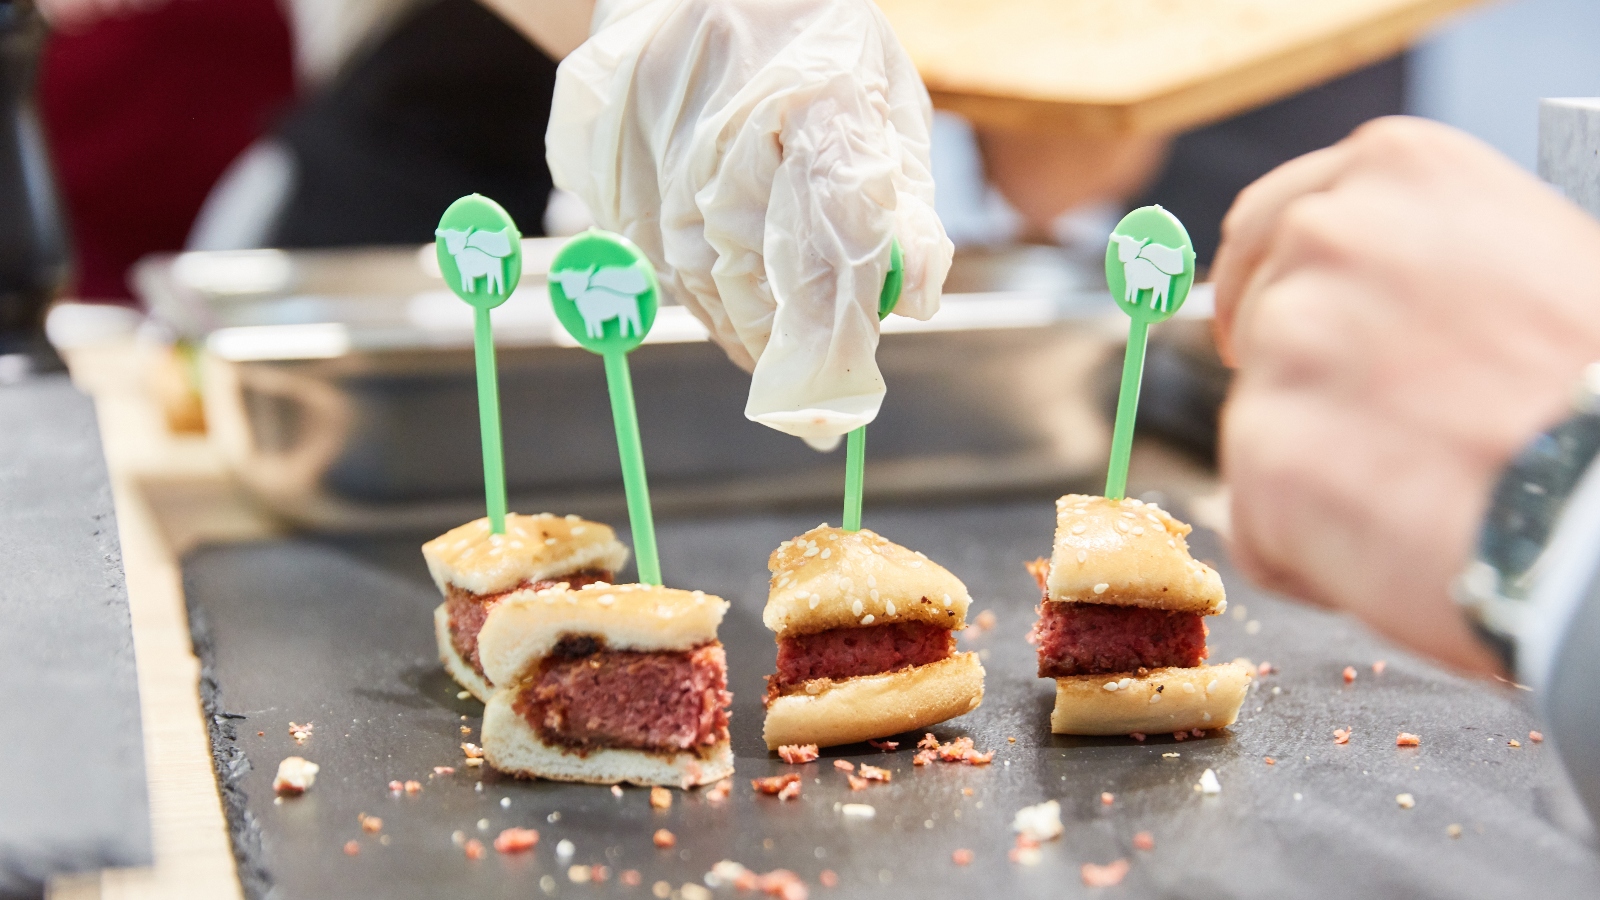 Beyond Meat hires ex Tyson Foods employees